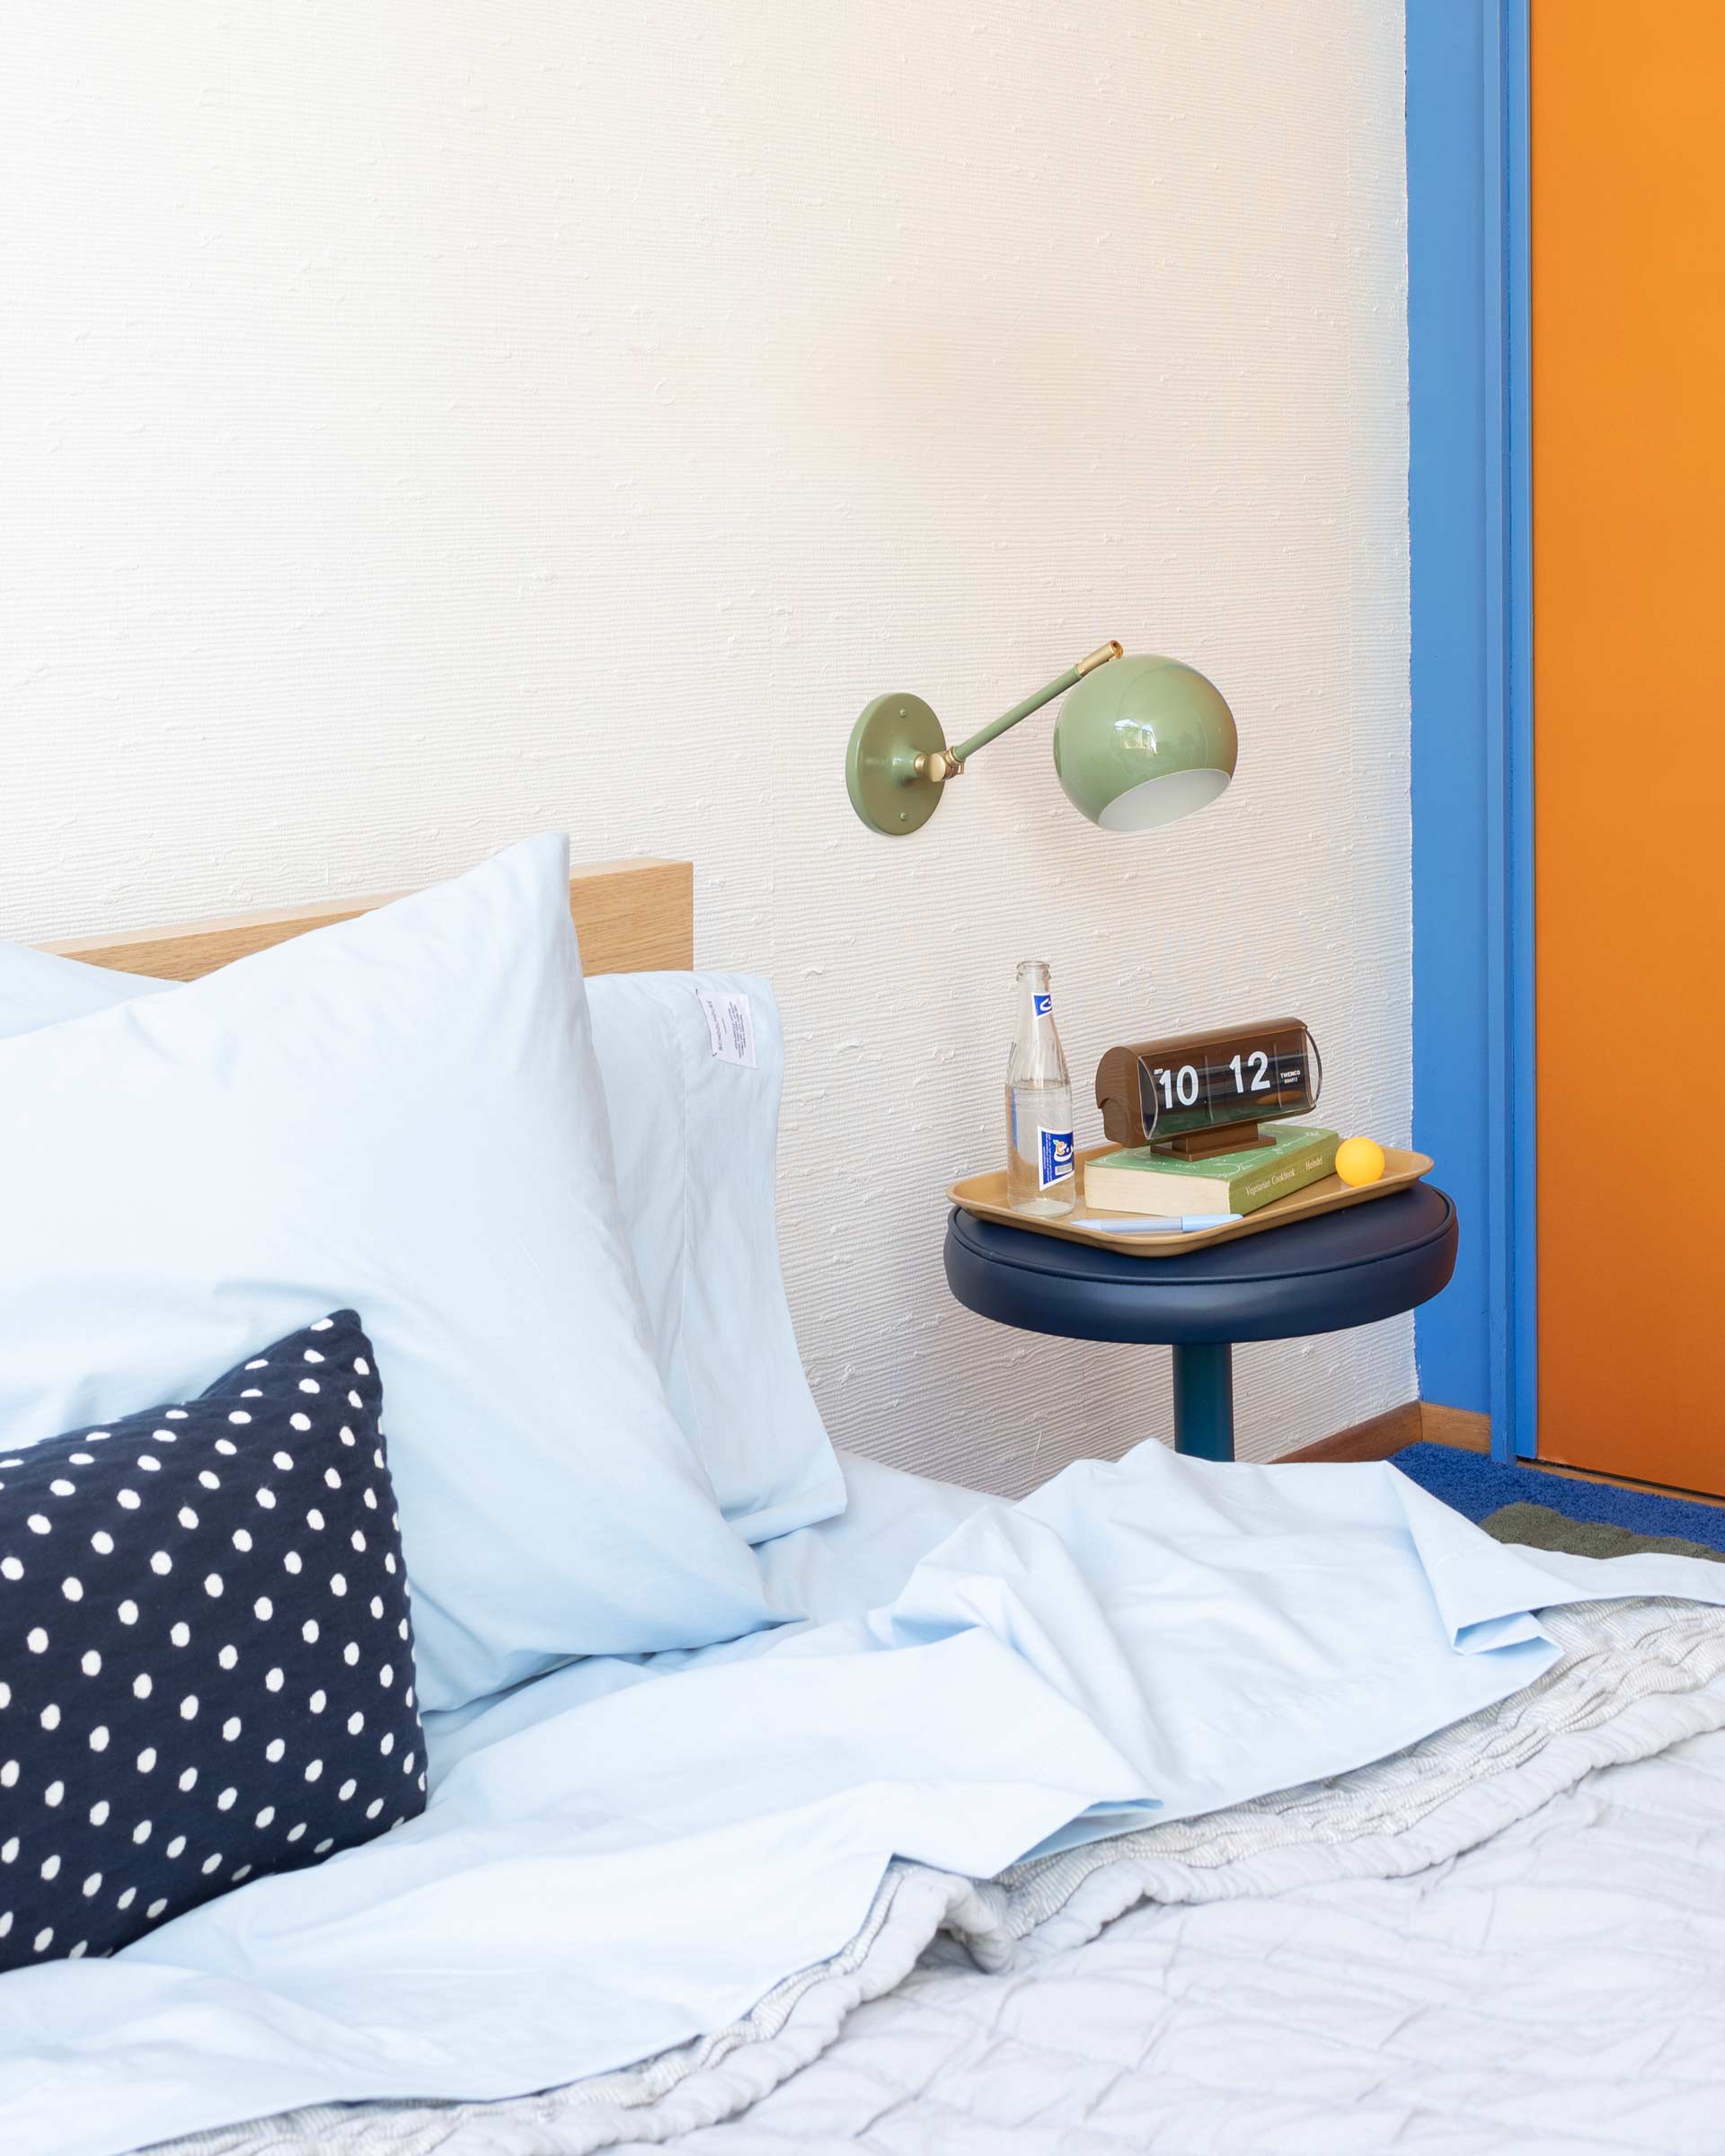 Bed with colorful bedside lamp.